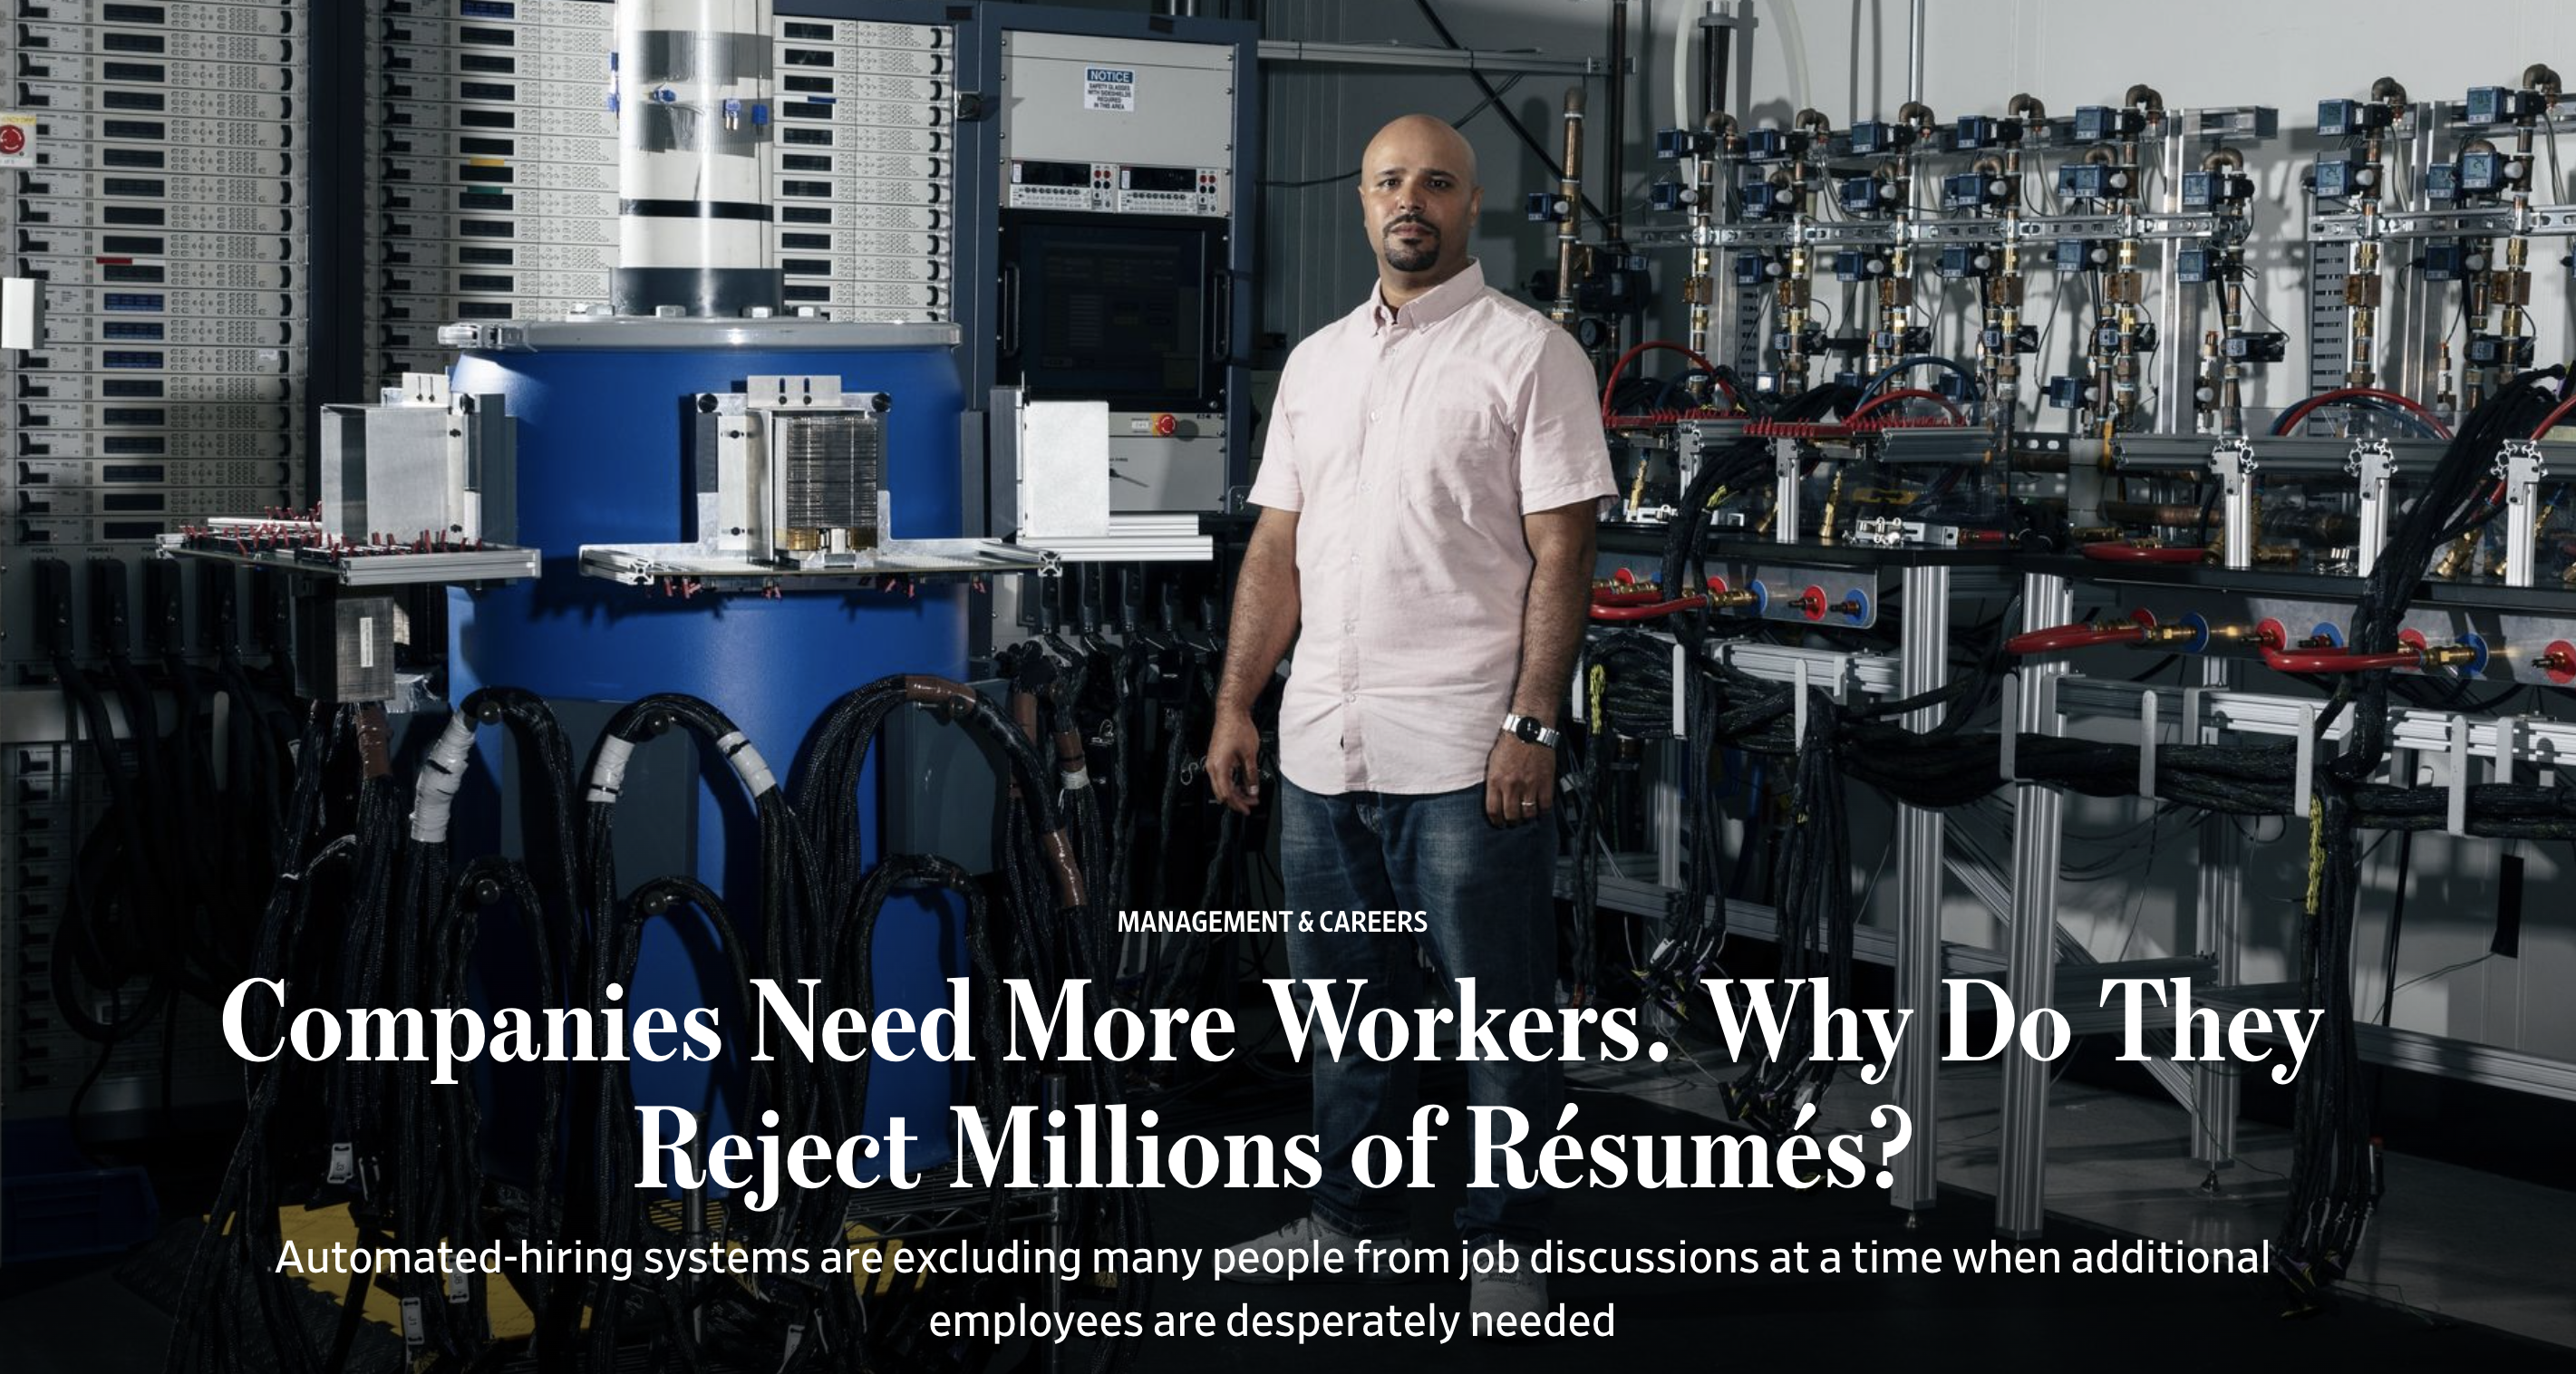 Companies Need More Workers. Why Do They Reject Millions of Résumés